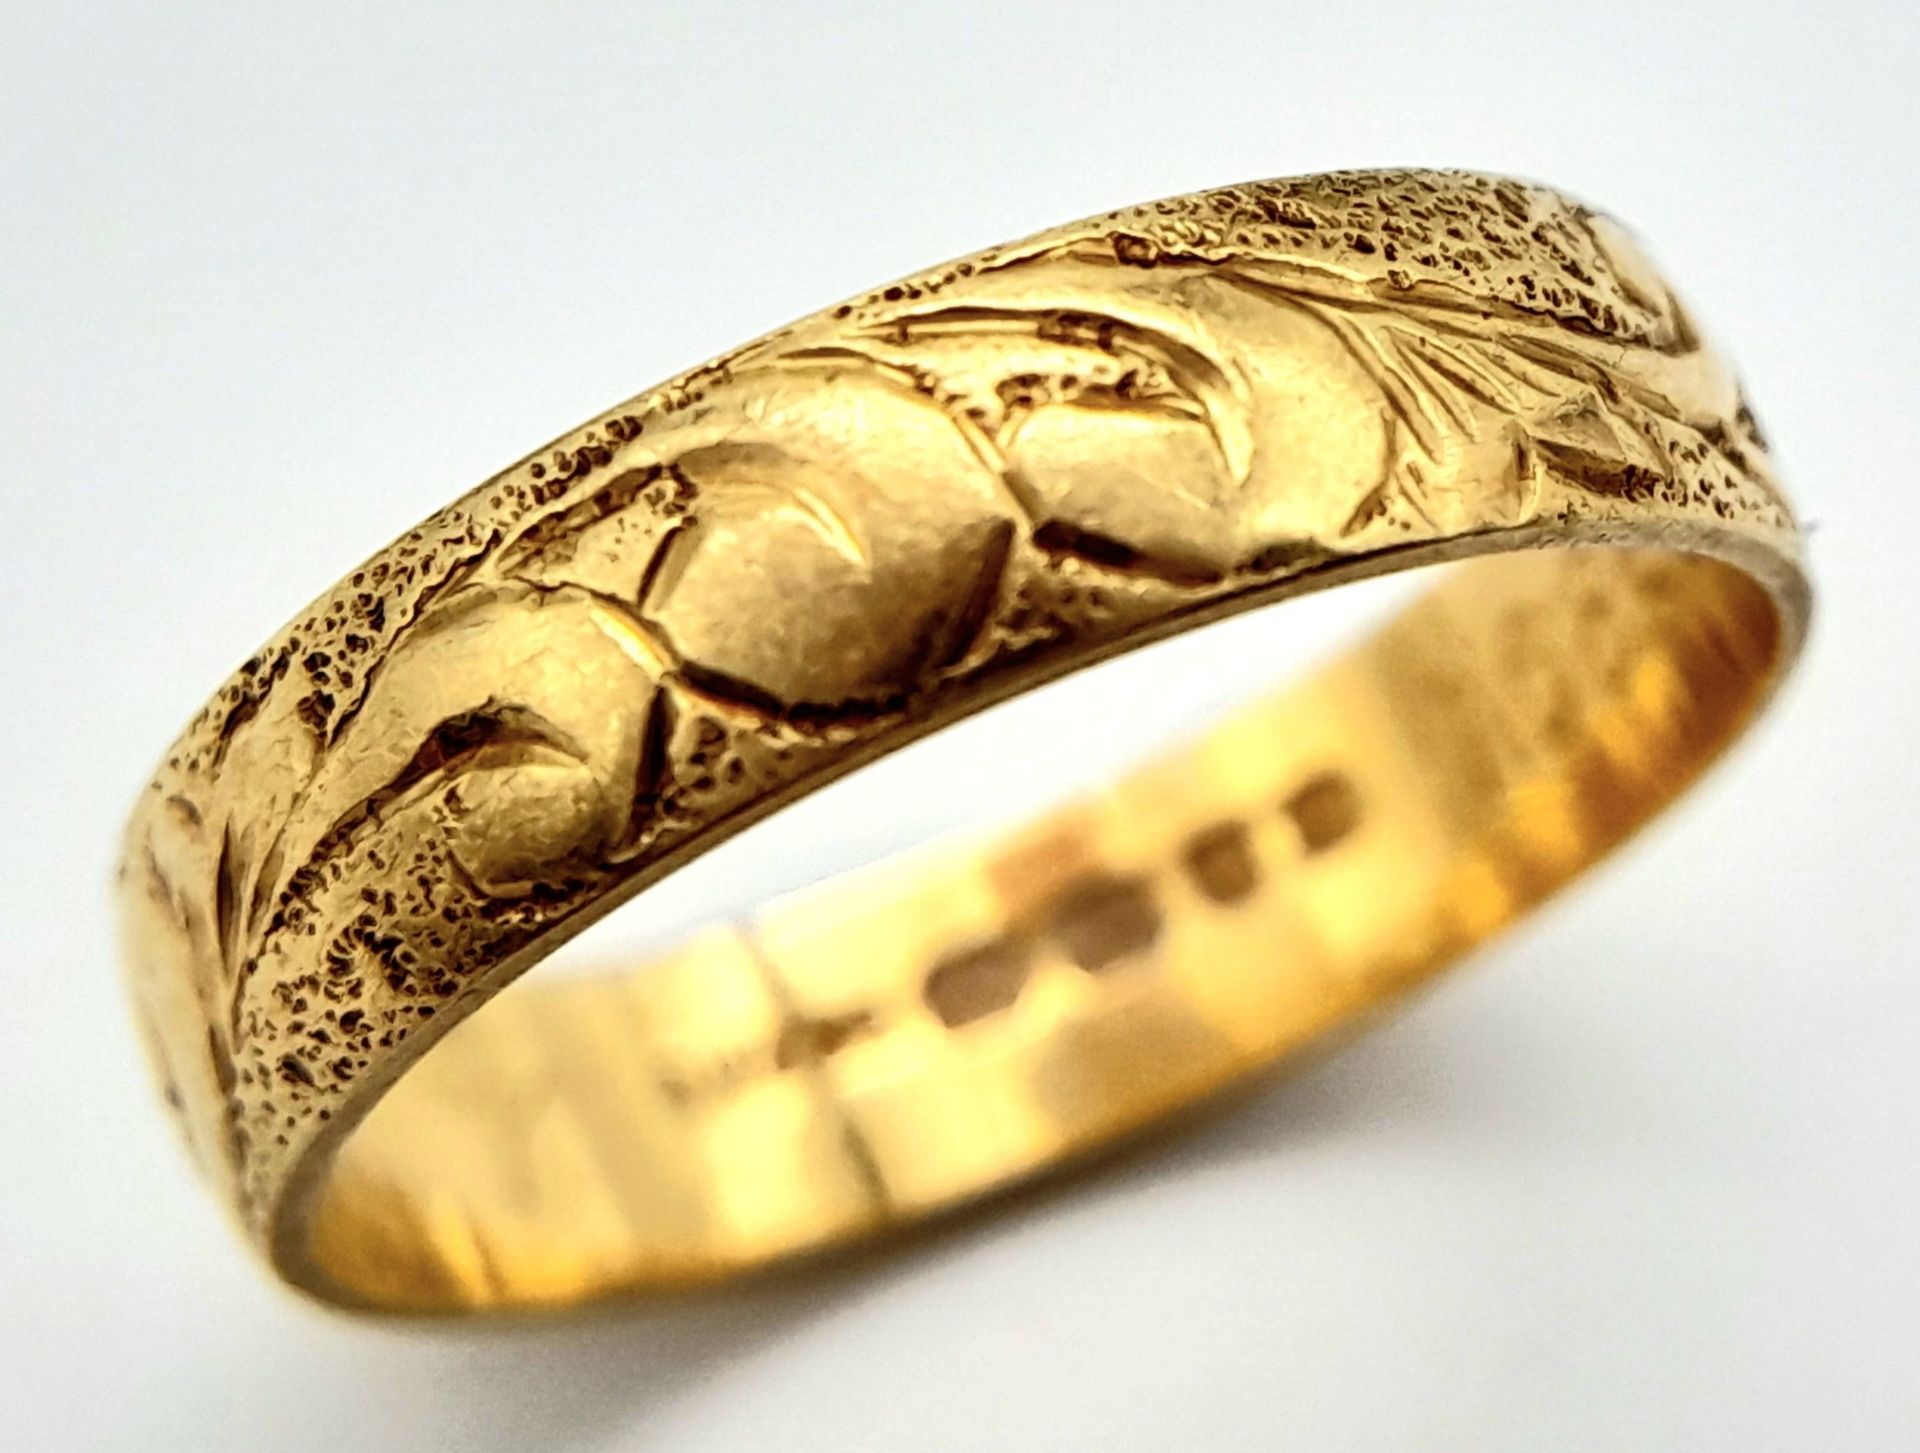 An 18 K yellow gold band ring with an engraved surface. Size: L, weight: 2.5 g. - Bild 3 aus 6